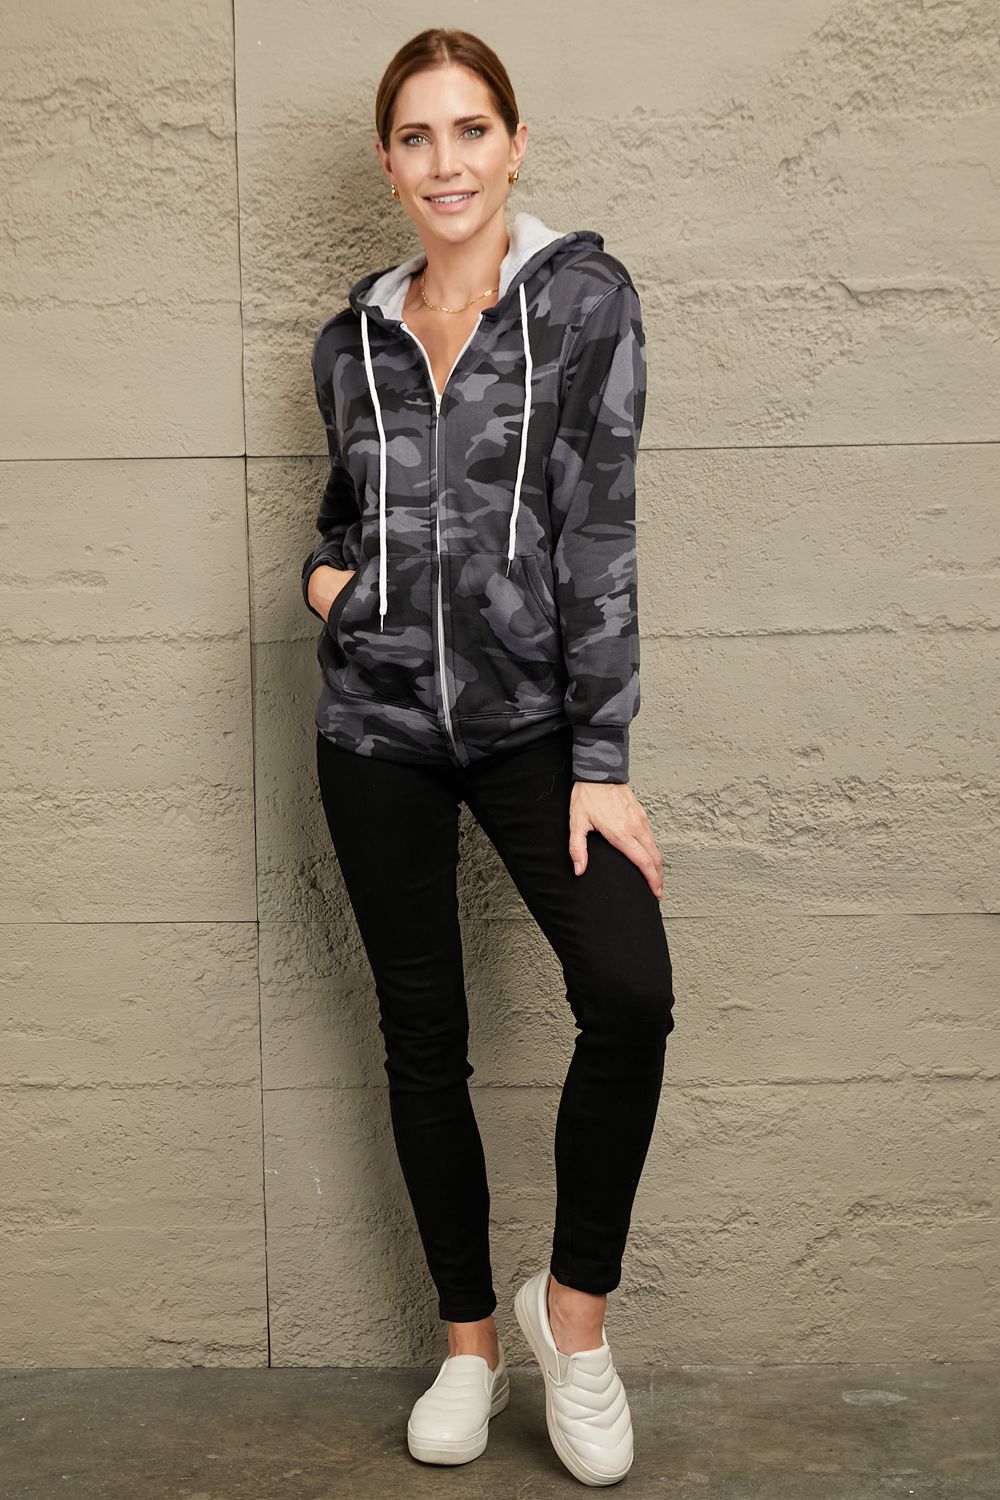 Double Take Camouflage Drawstring Detail Zip Up Hooded Jacket